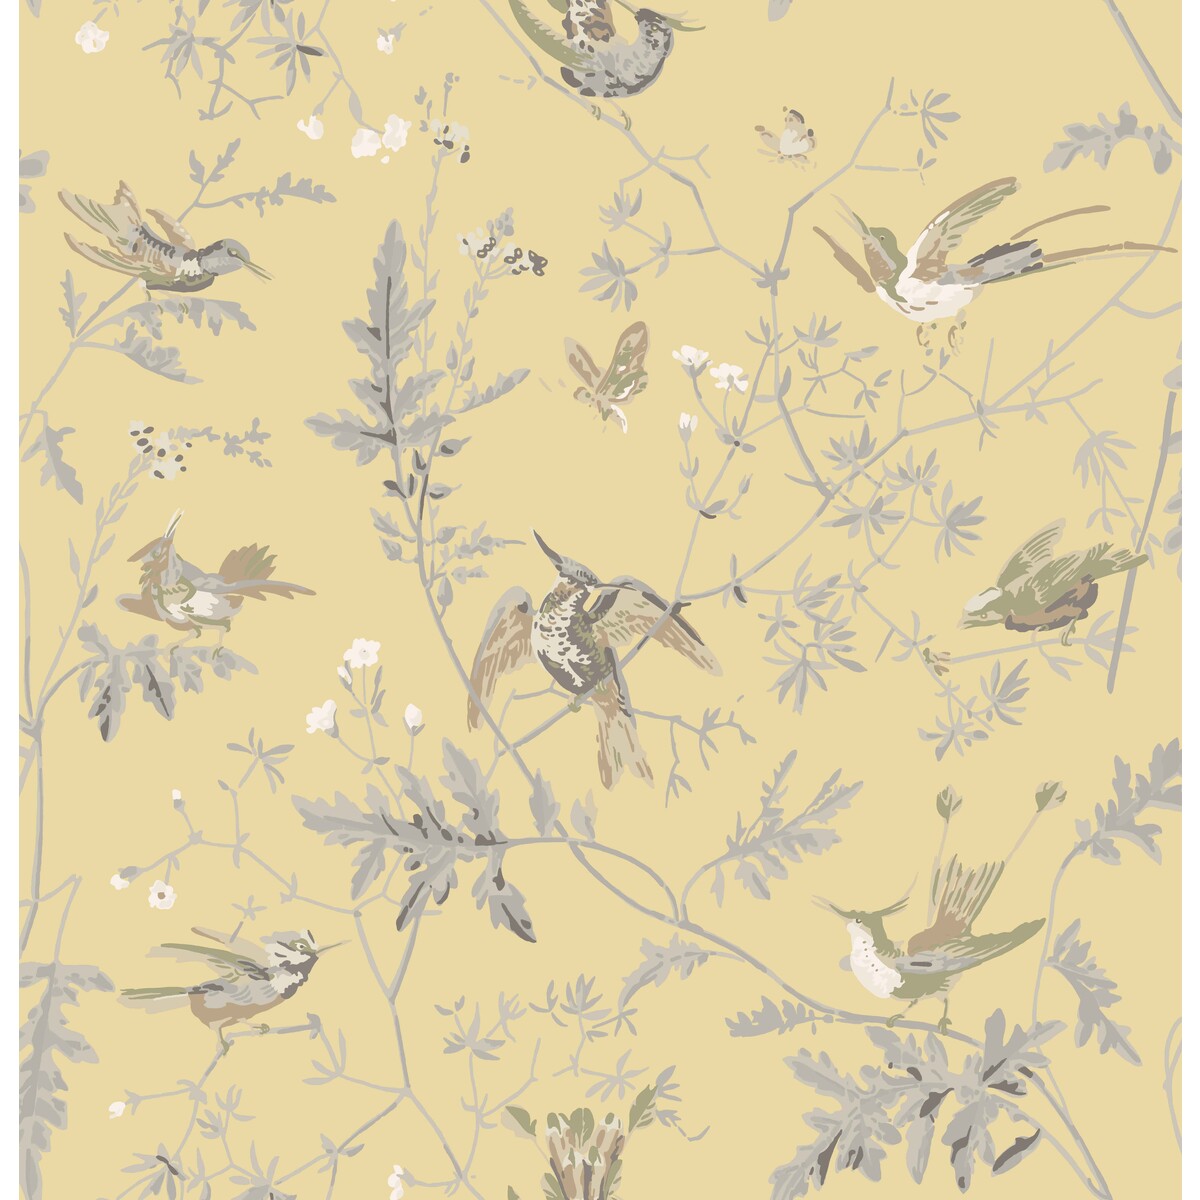 Hummingbirds fabric in gld/sft grey color - pattern F111/1001.CS.0 - by Cole &amp; Son in the Cole &amp; Son Contemporary Fabrics collection